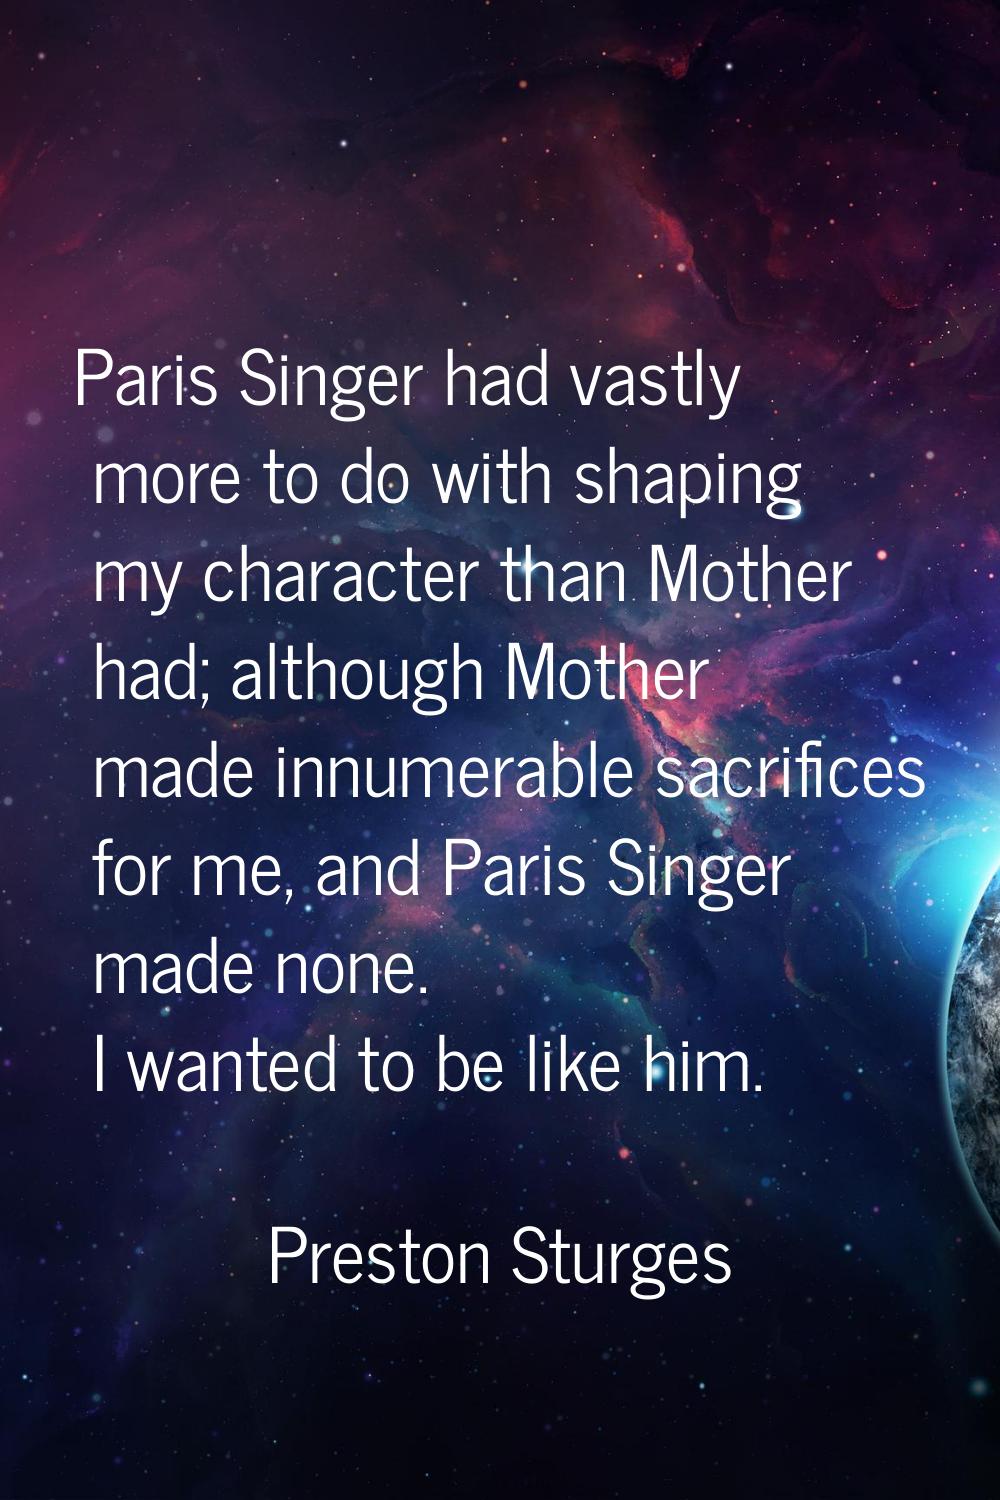 Paris Singer had vastly more to do with shaping my character than Mother had; although Mother made 